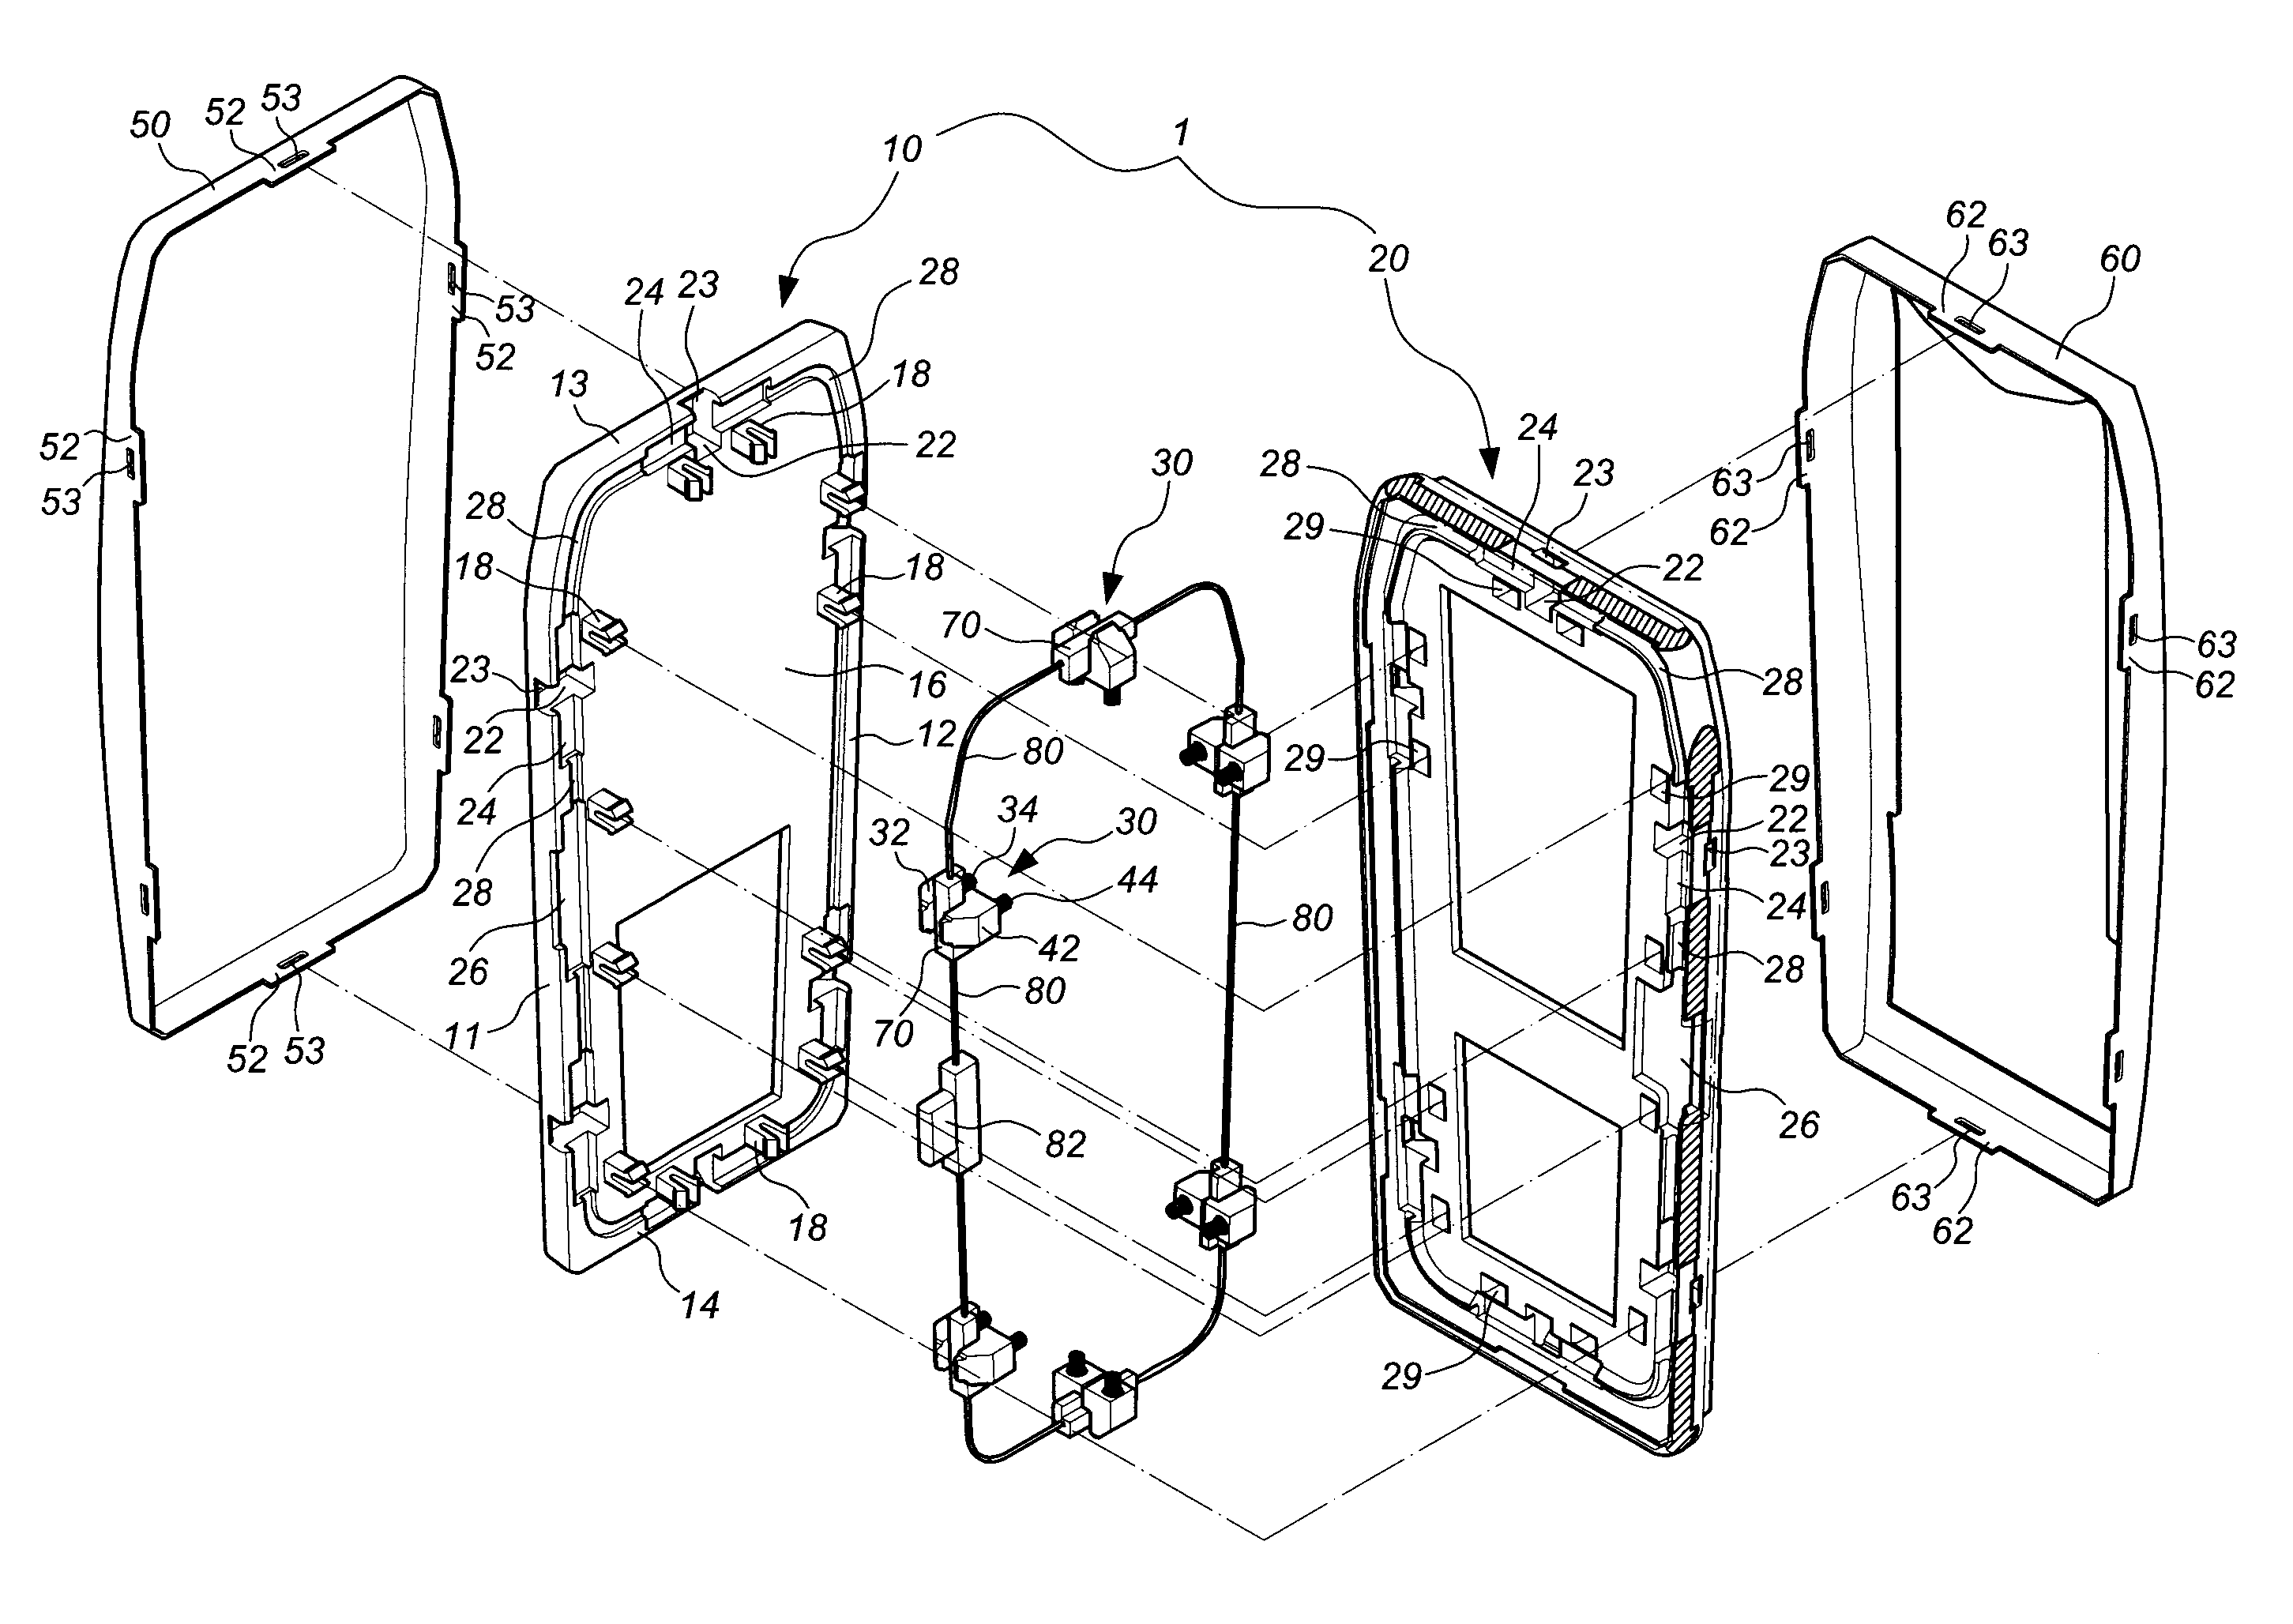 Housing assembly for a portable electronic device